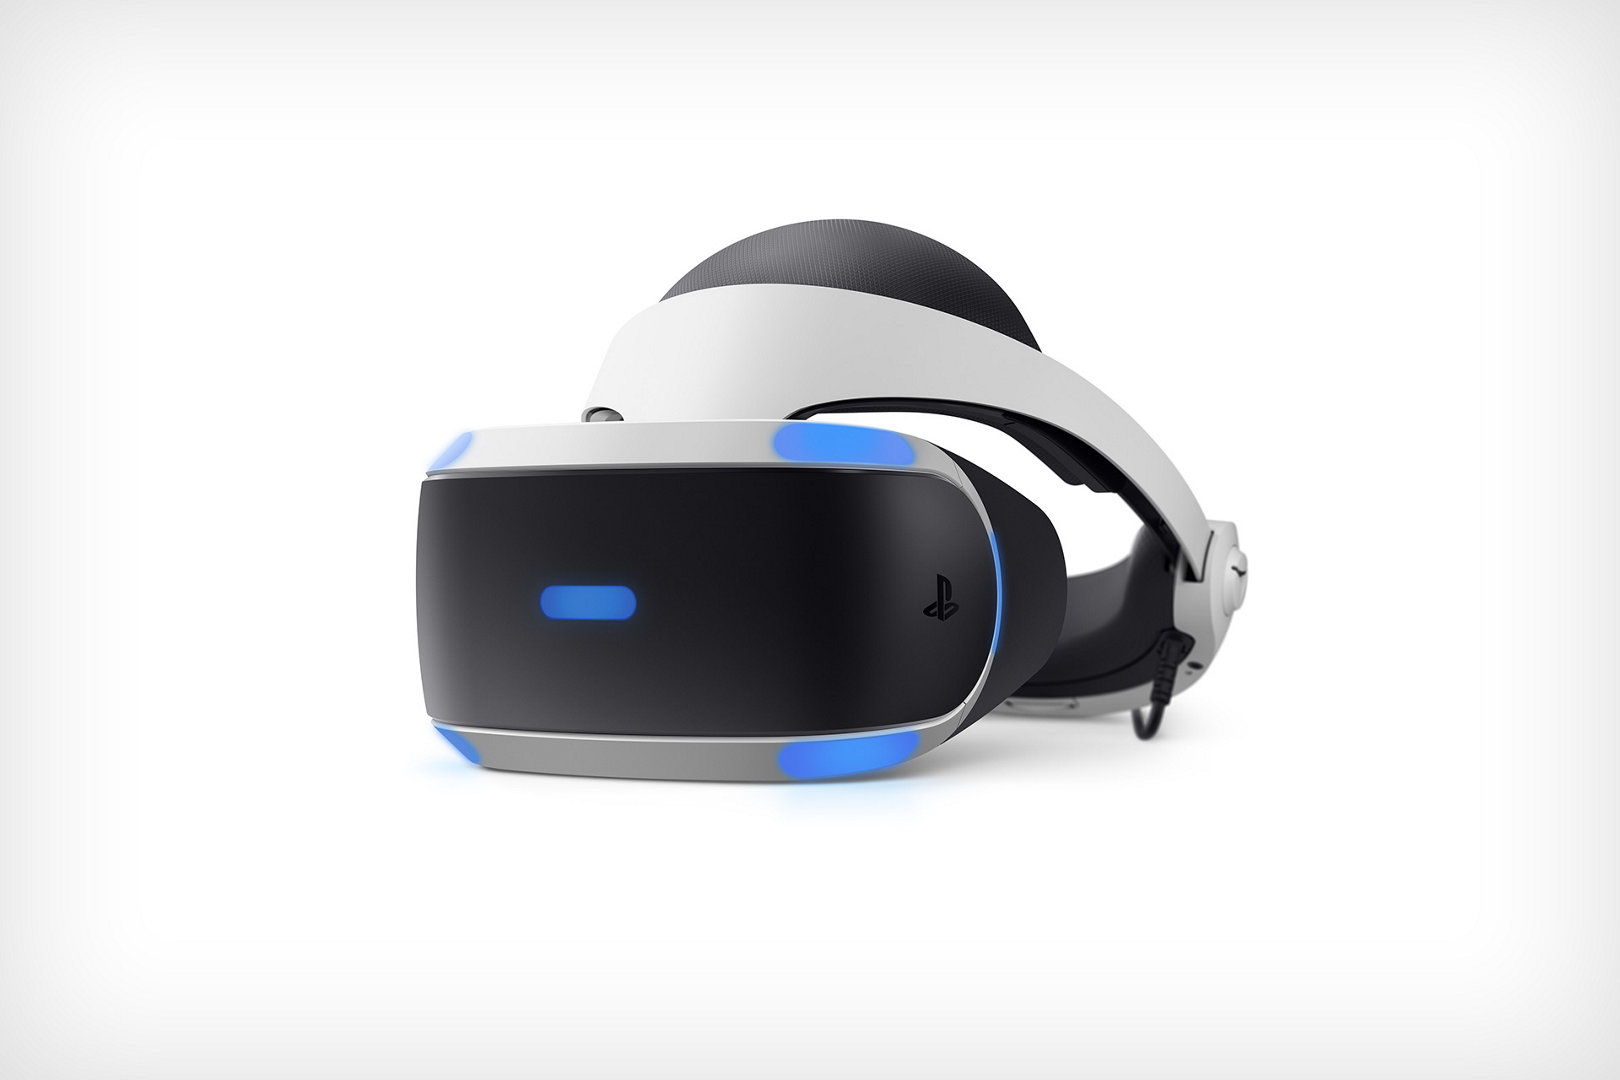 playstation vr by itself